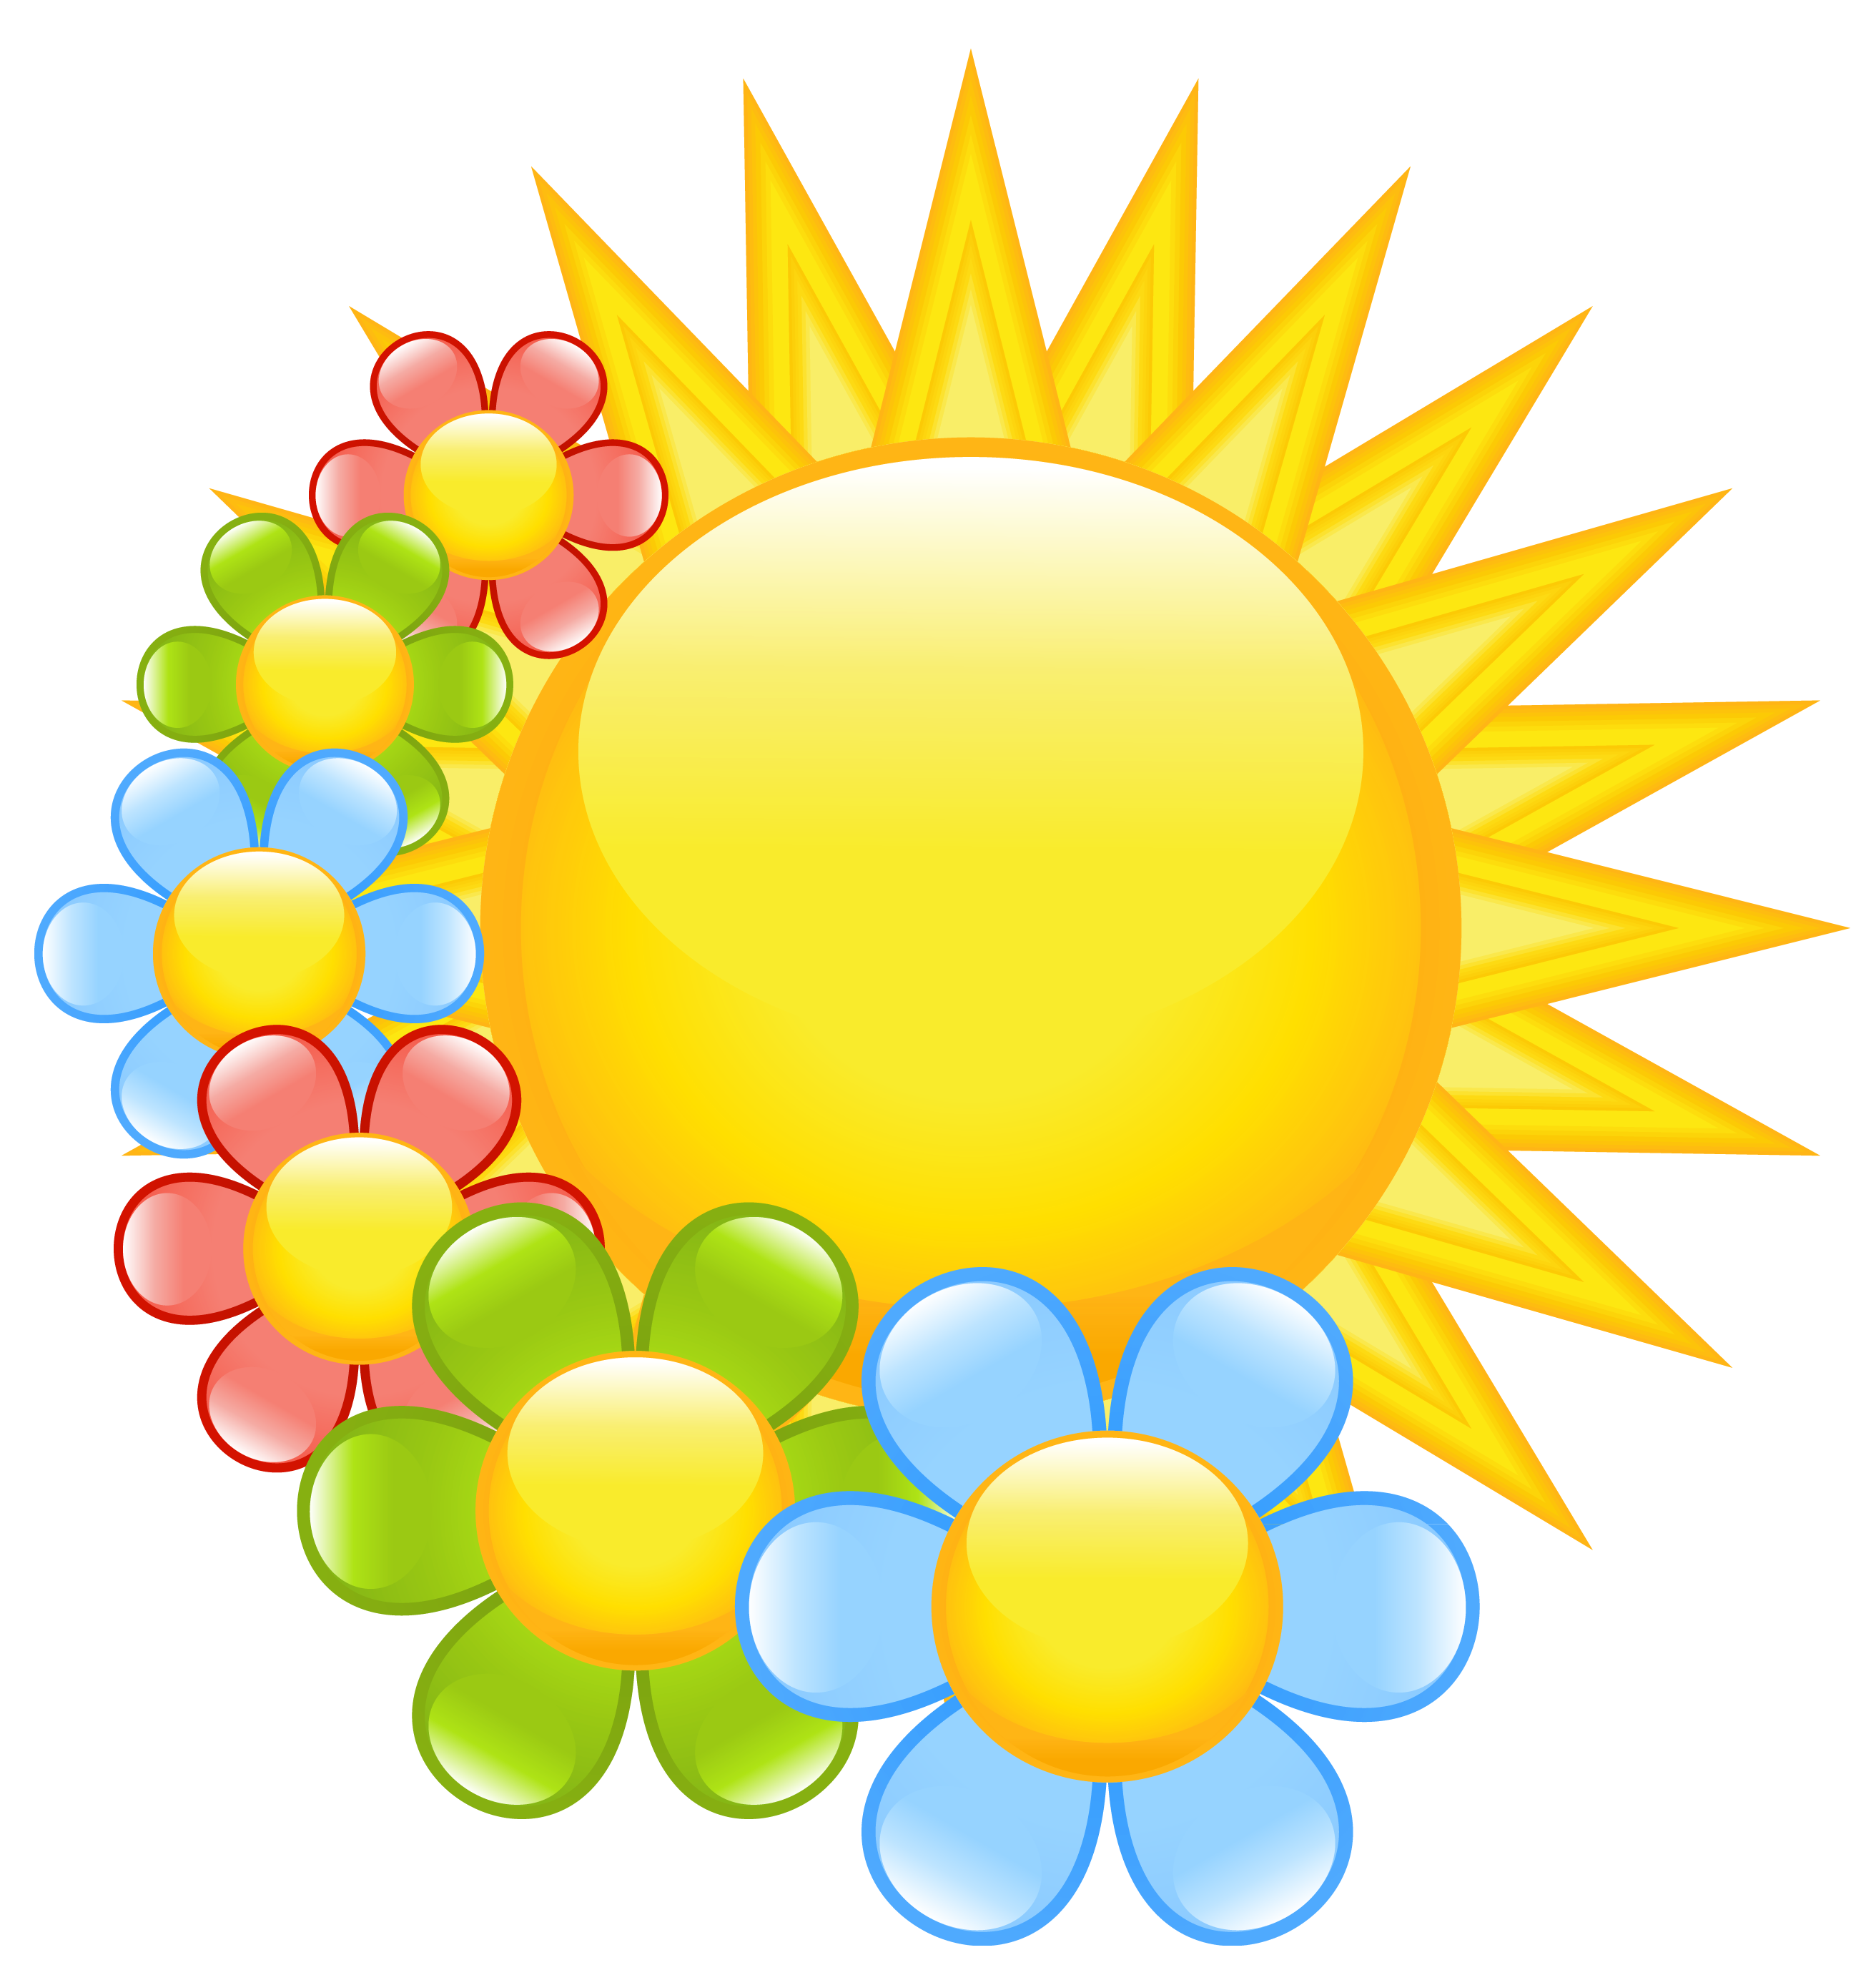 Spring Flowers and Sun Clip Art